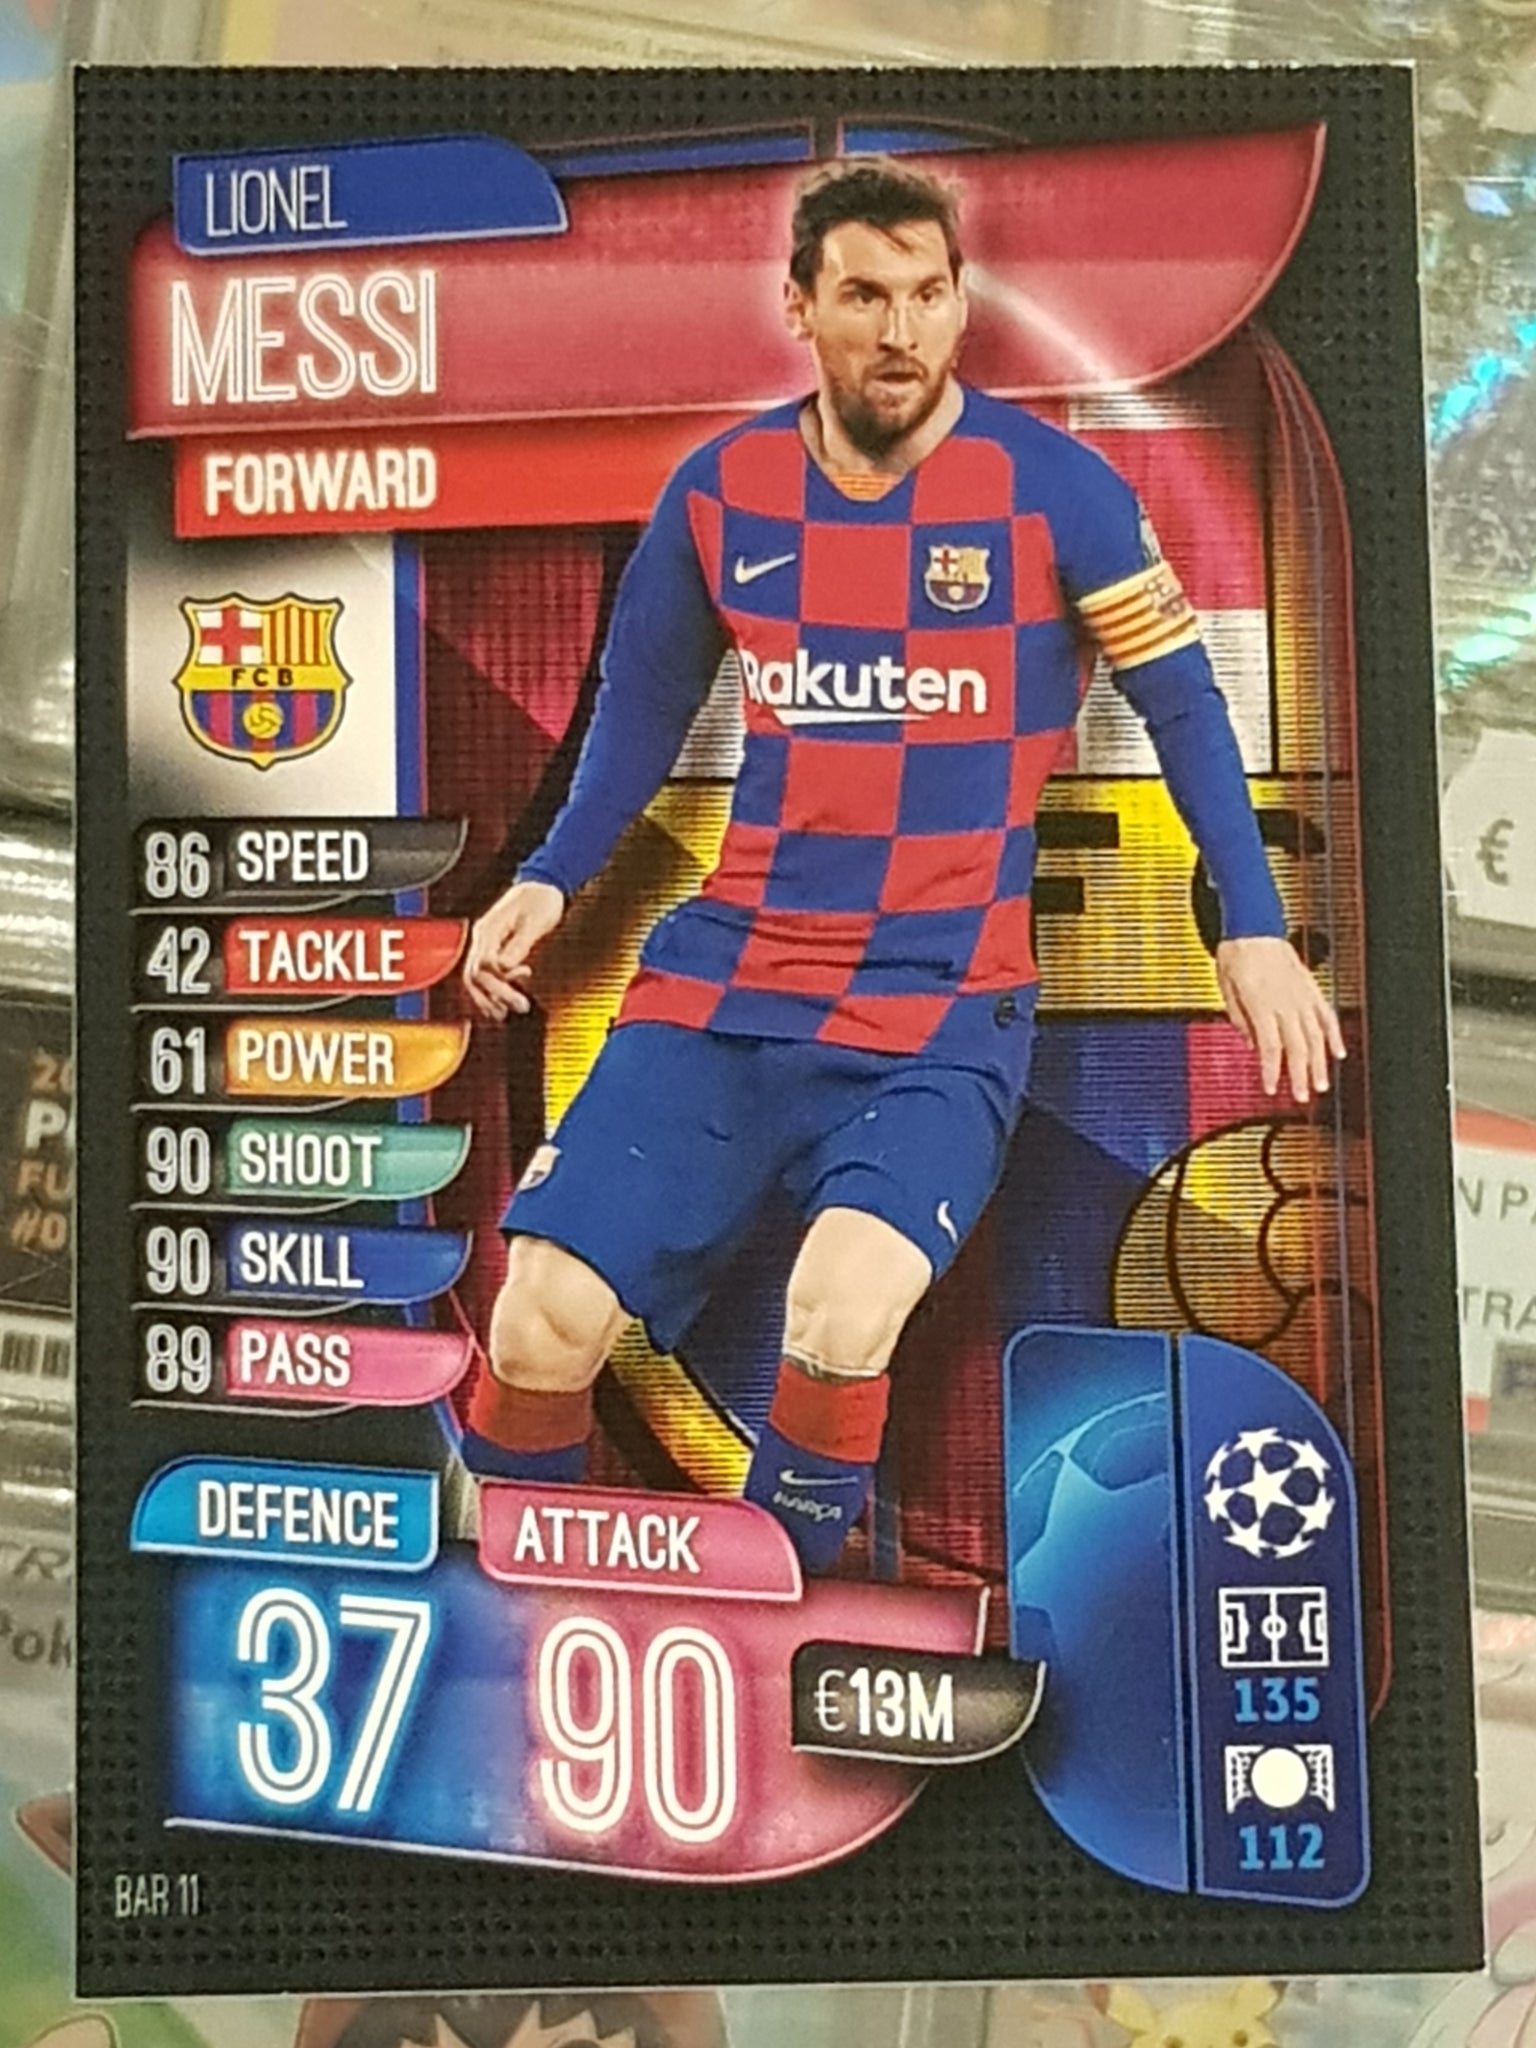 2019-20 Topps Match Attax UCL Lionel Messi #BAR11 Trading Card